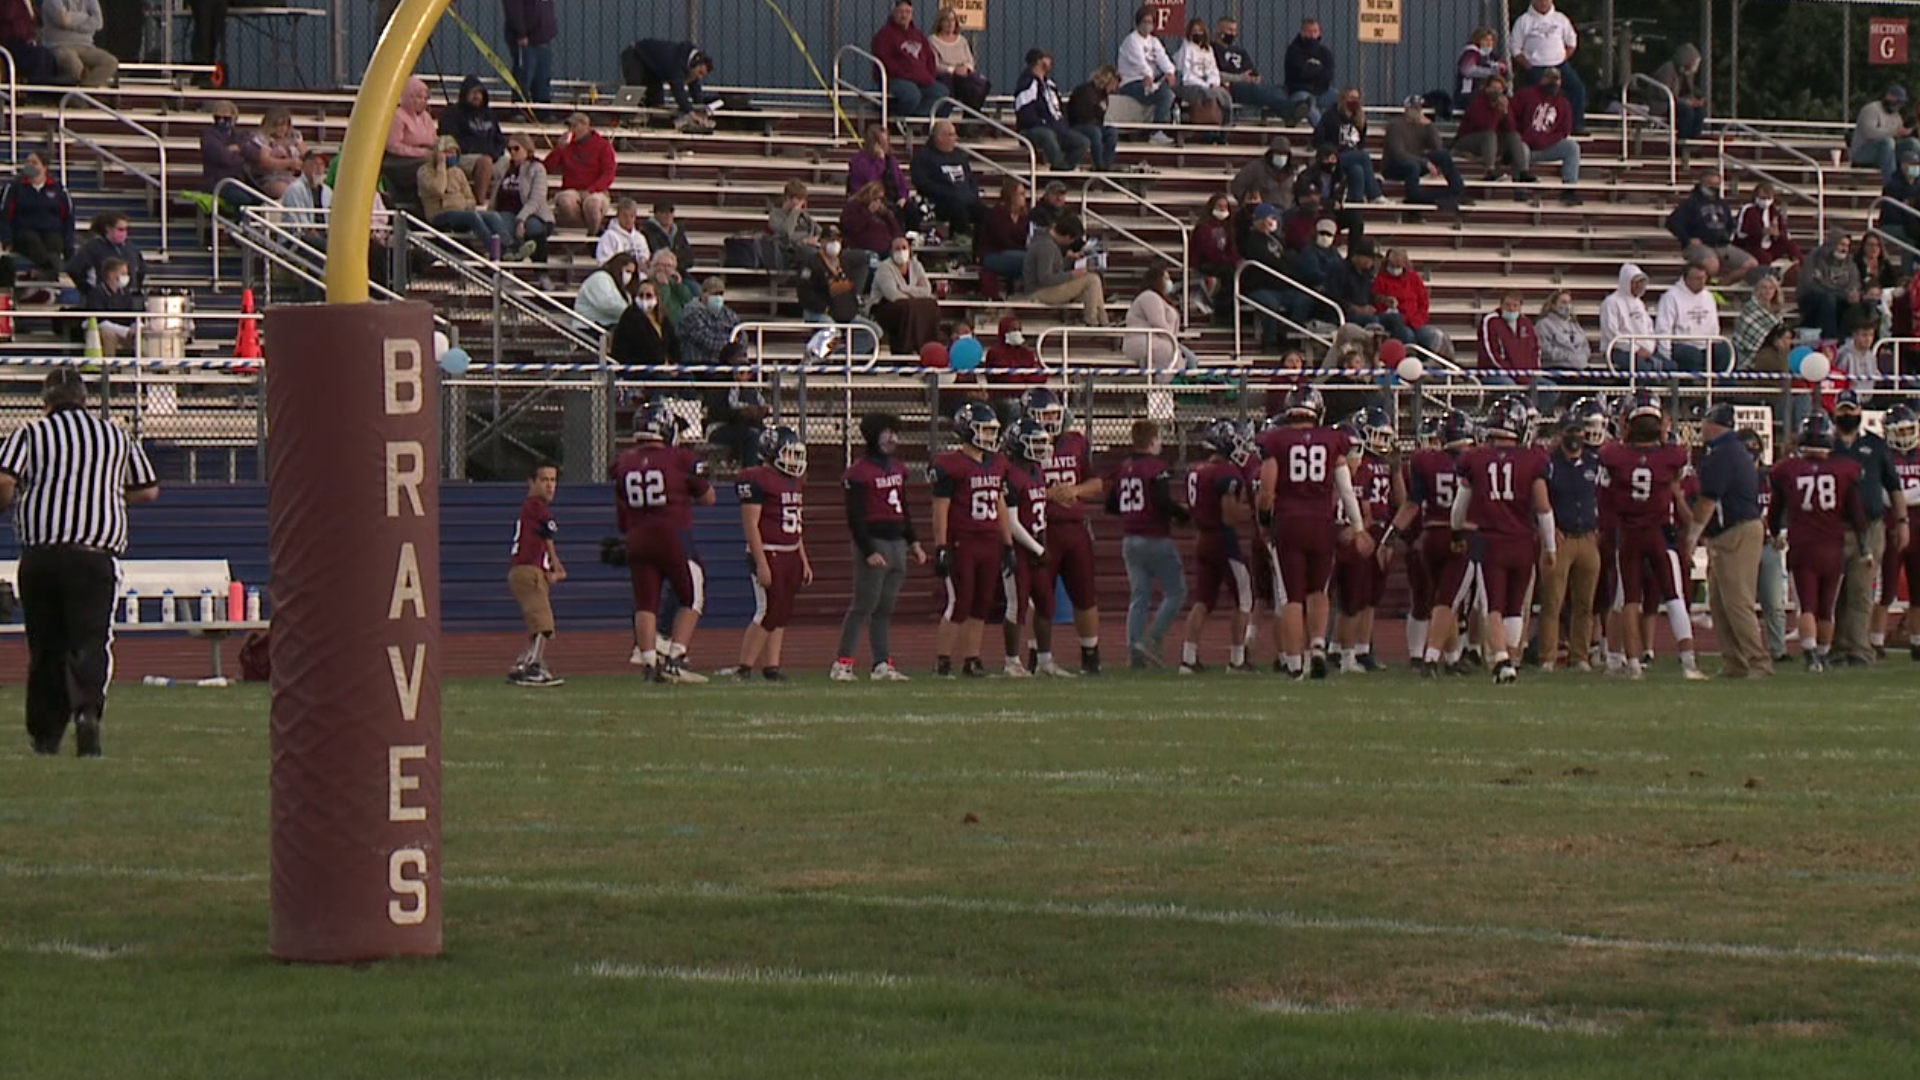 Friday Night football in Northumberland County included one school district allowing more fans into their game.